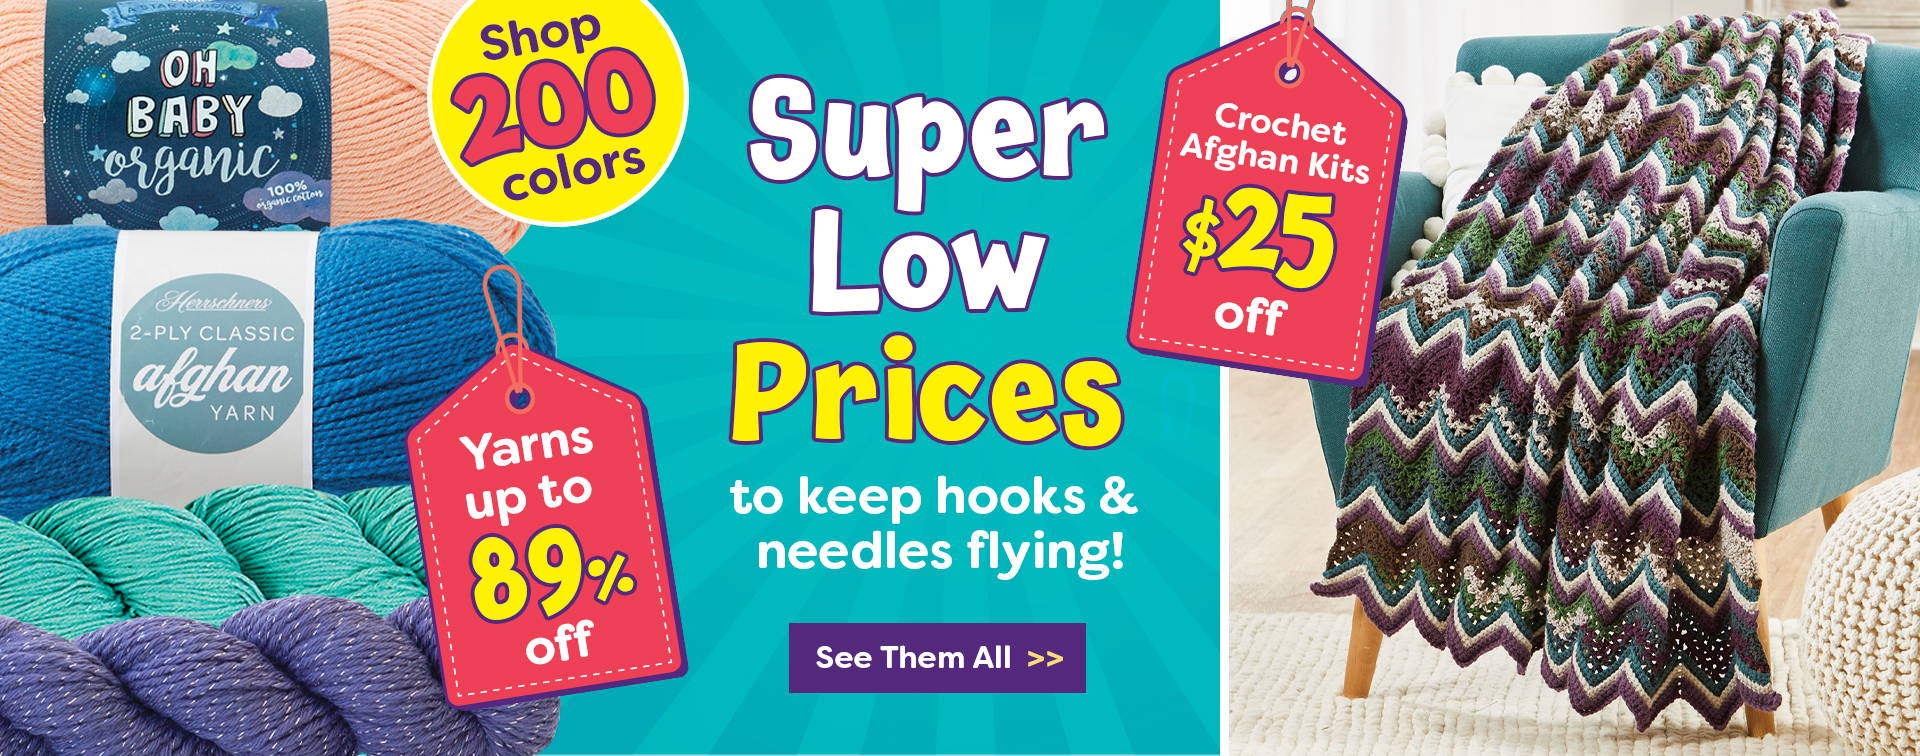 Super Low prices to keep hooks and needles flying. Shop 200 colors. Yarns up to 89% off. Crochet afghan kits $25 off. 